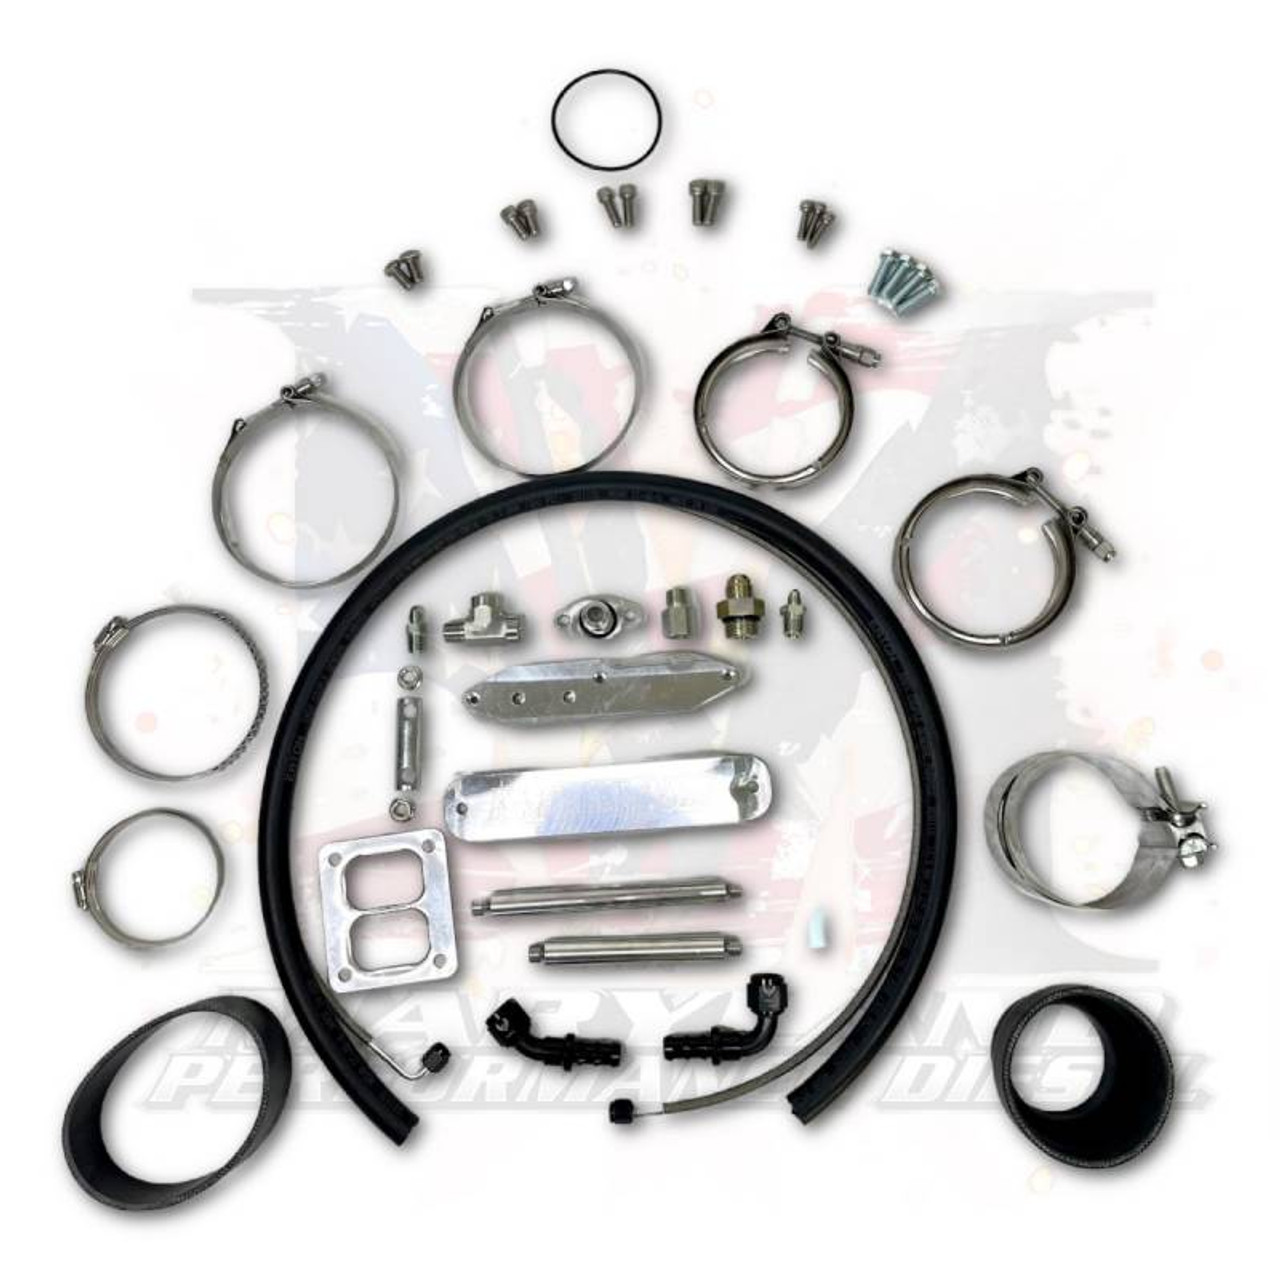 MPD Compound Kit for 2011 to 2014 Ford 6.7L Powerstroke (MPD-67-PSD-1114-CTK) Kit View